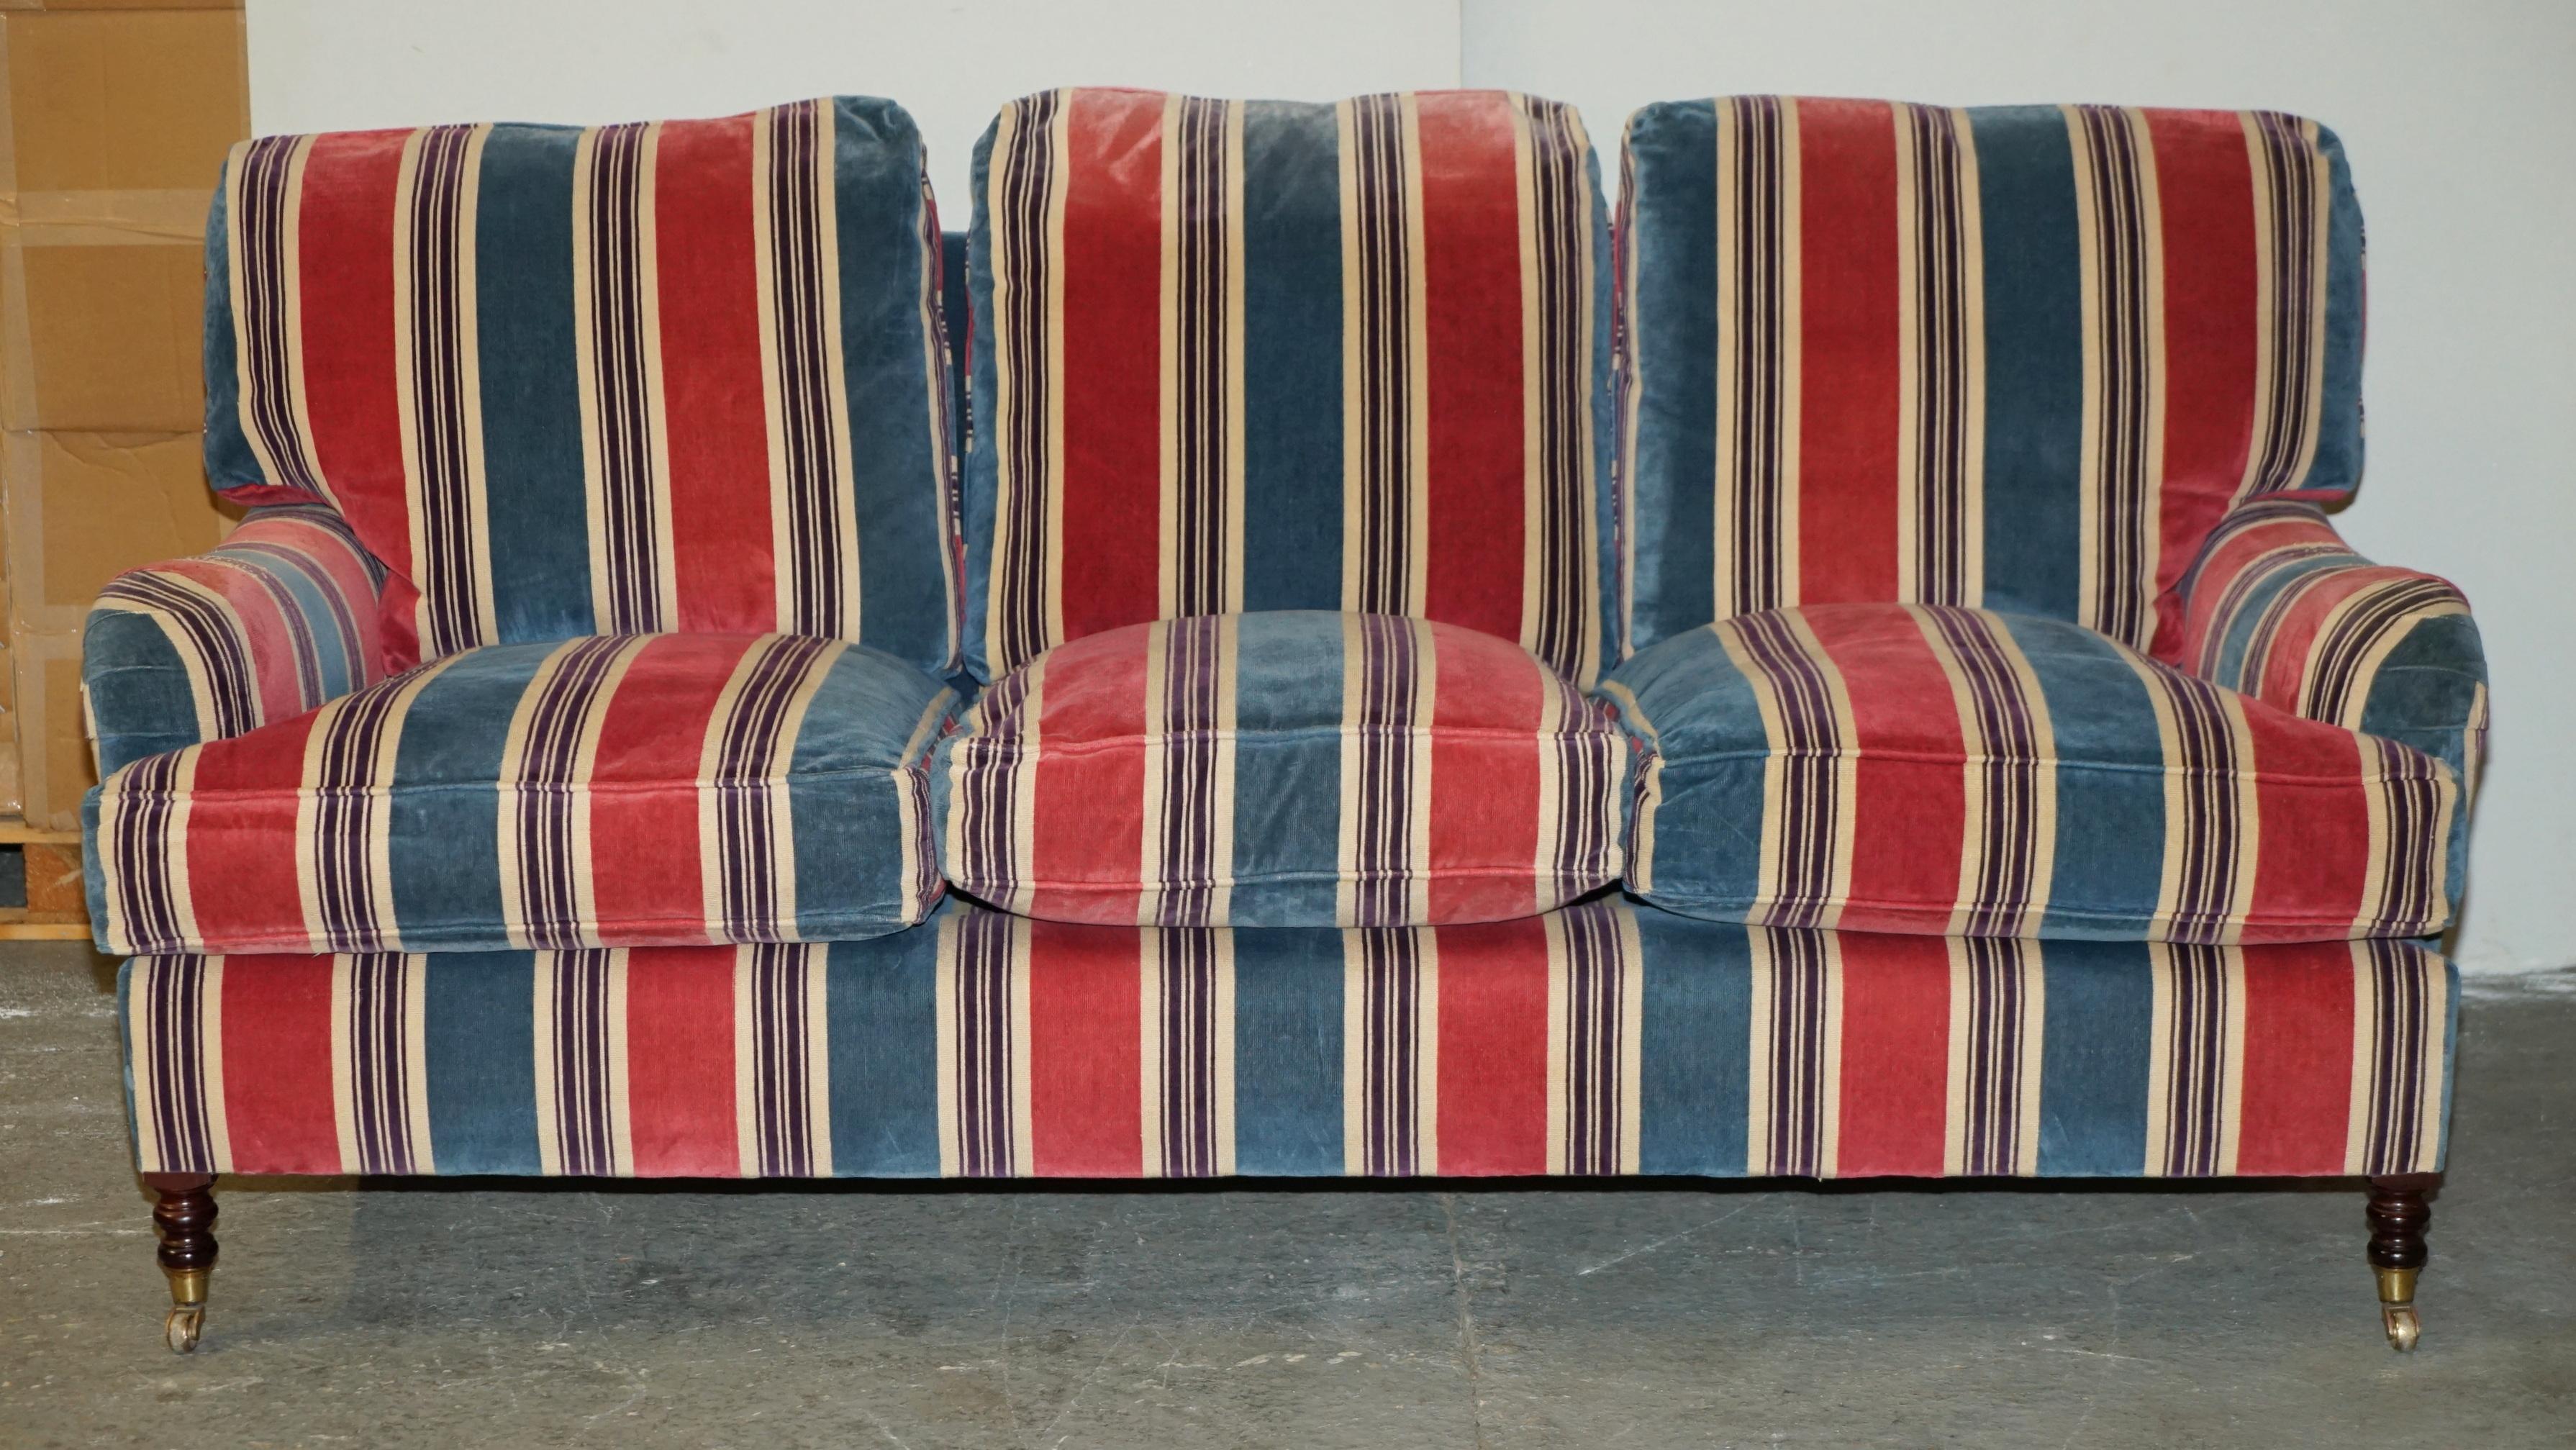 English PAiR OF GEORGE SMITH CHELSEA SIGNATURE SCROLL ARM SOFAS HOWARD & SON'S MODEL For Sale